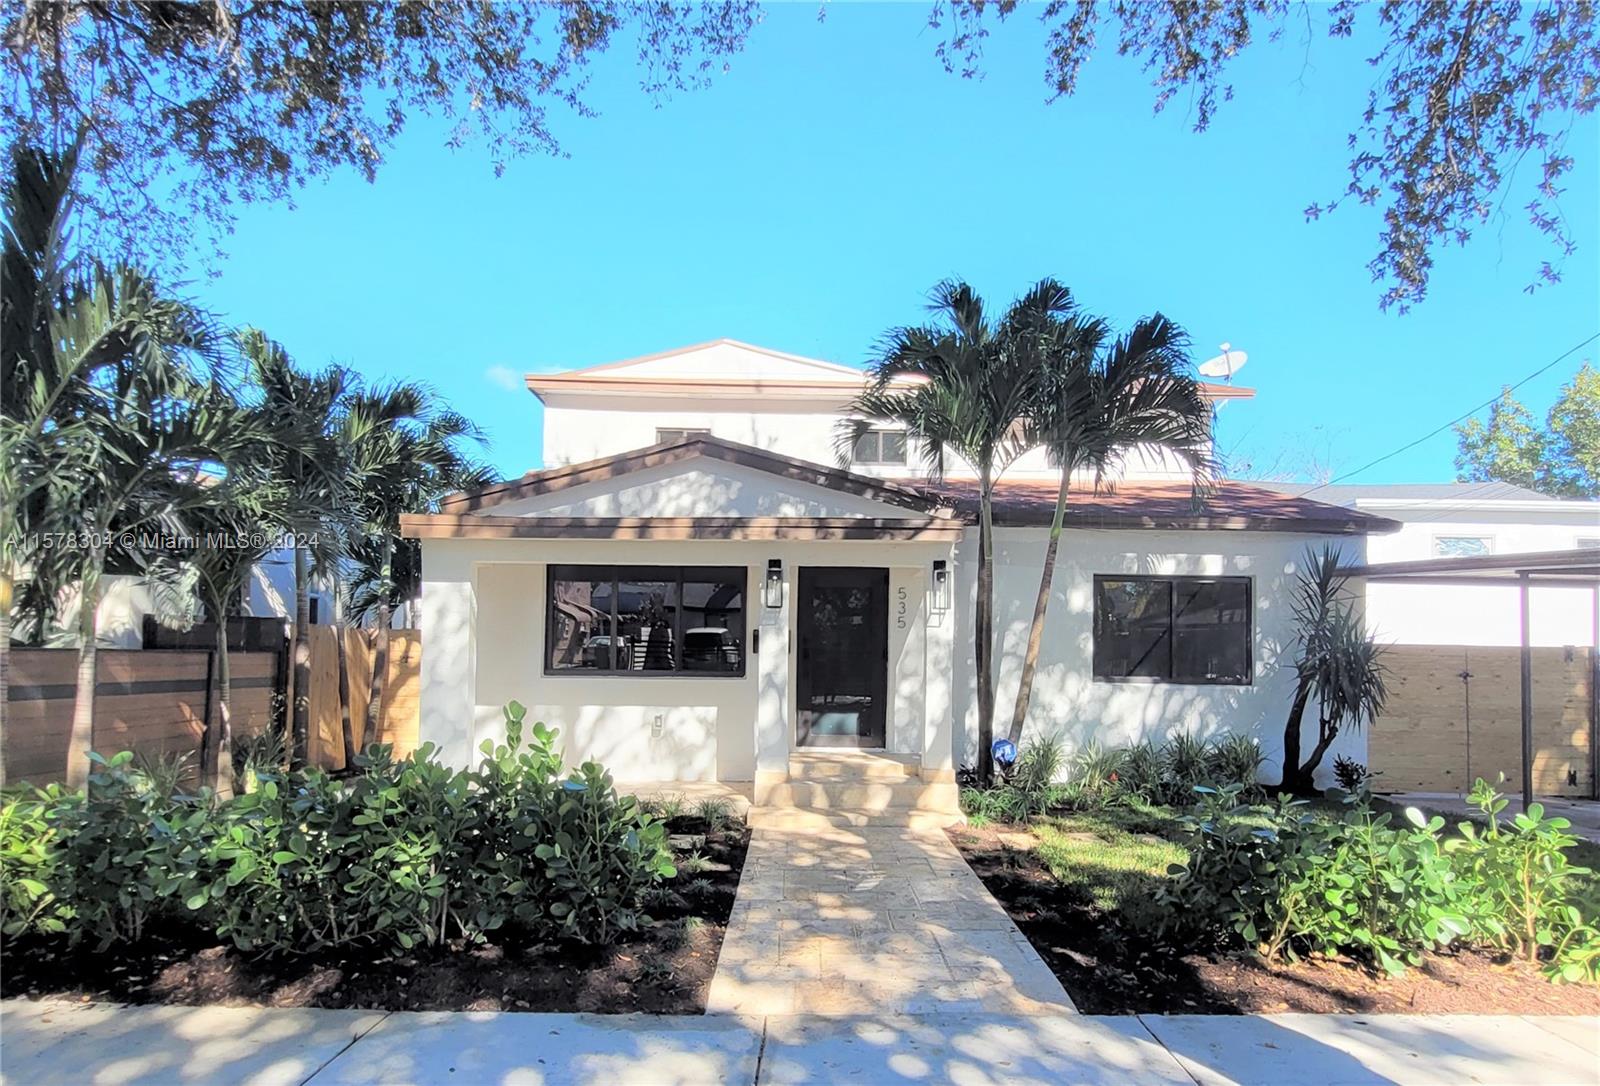 535 Nw 43rd St St, Miami, Broward County, Florida - 4 Bedrooms  
2 Bathrooms - 